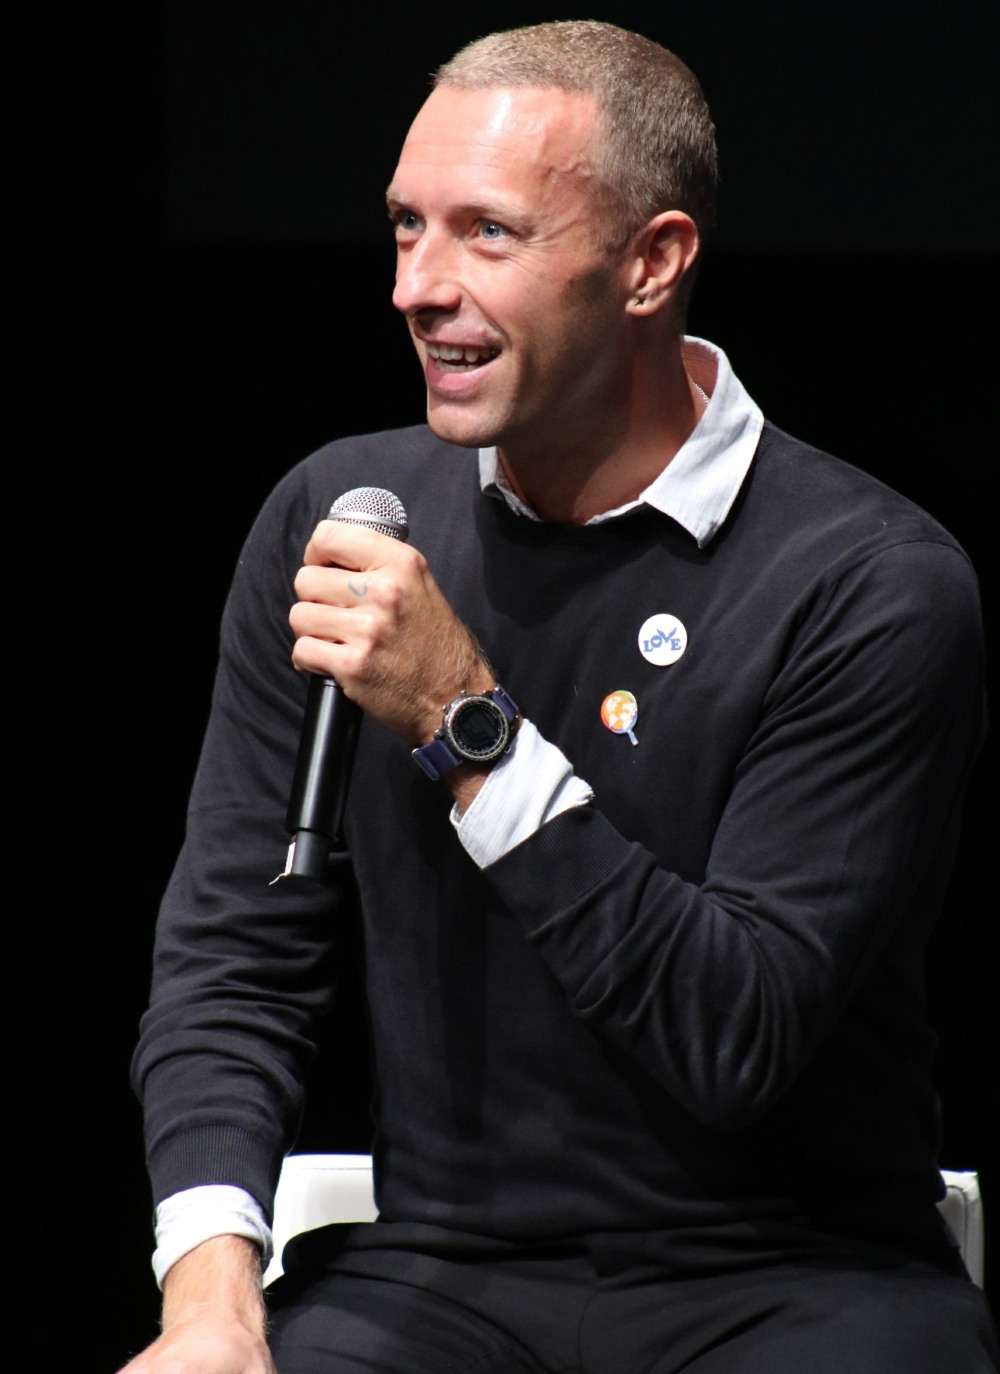 Chris Martin, Pharrell, and other celebs attend the Global Citizen's Global Goal Live: The Possible Dream Press Conference